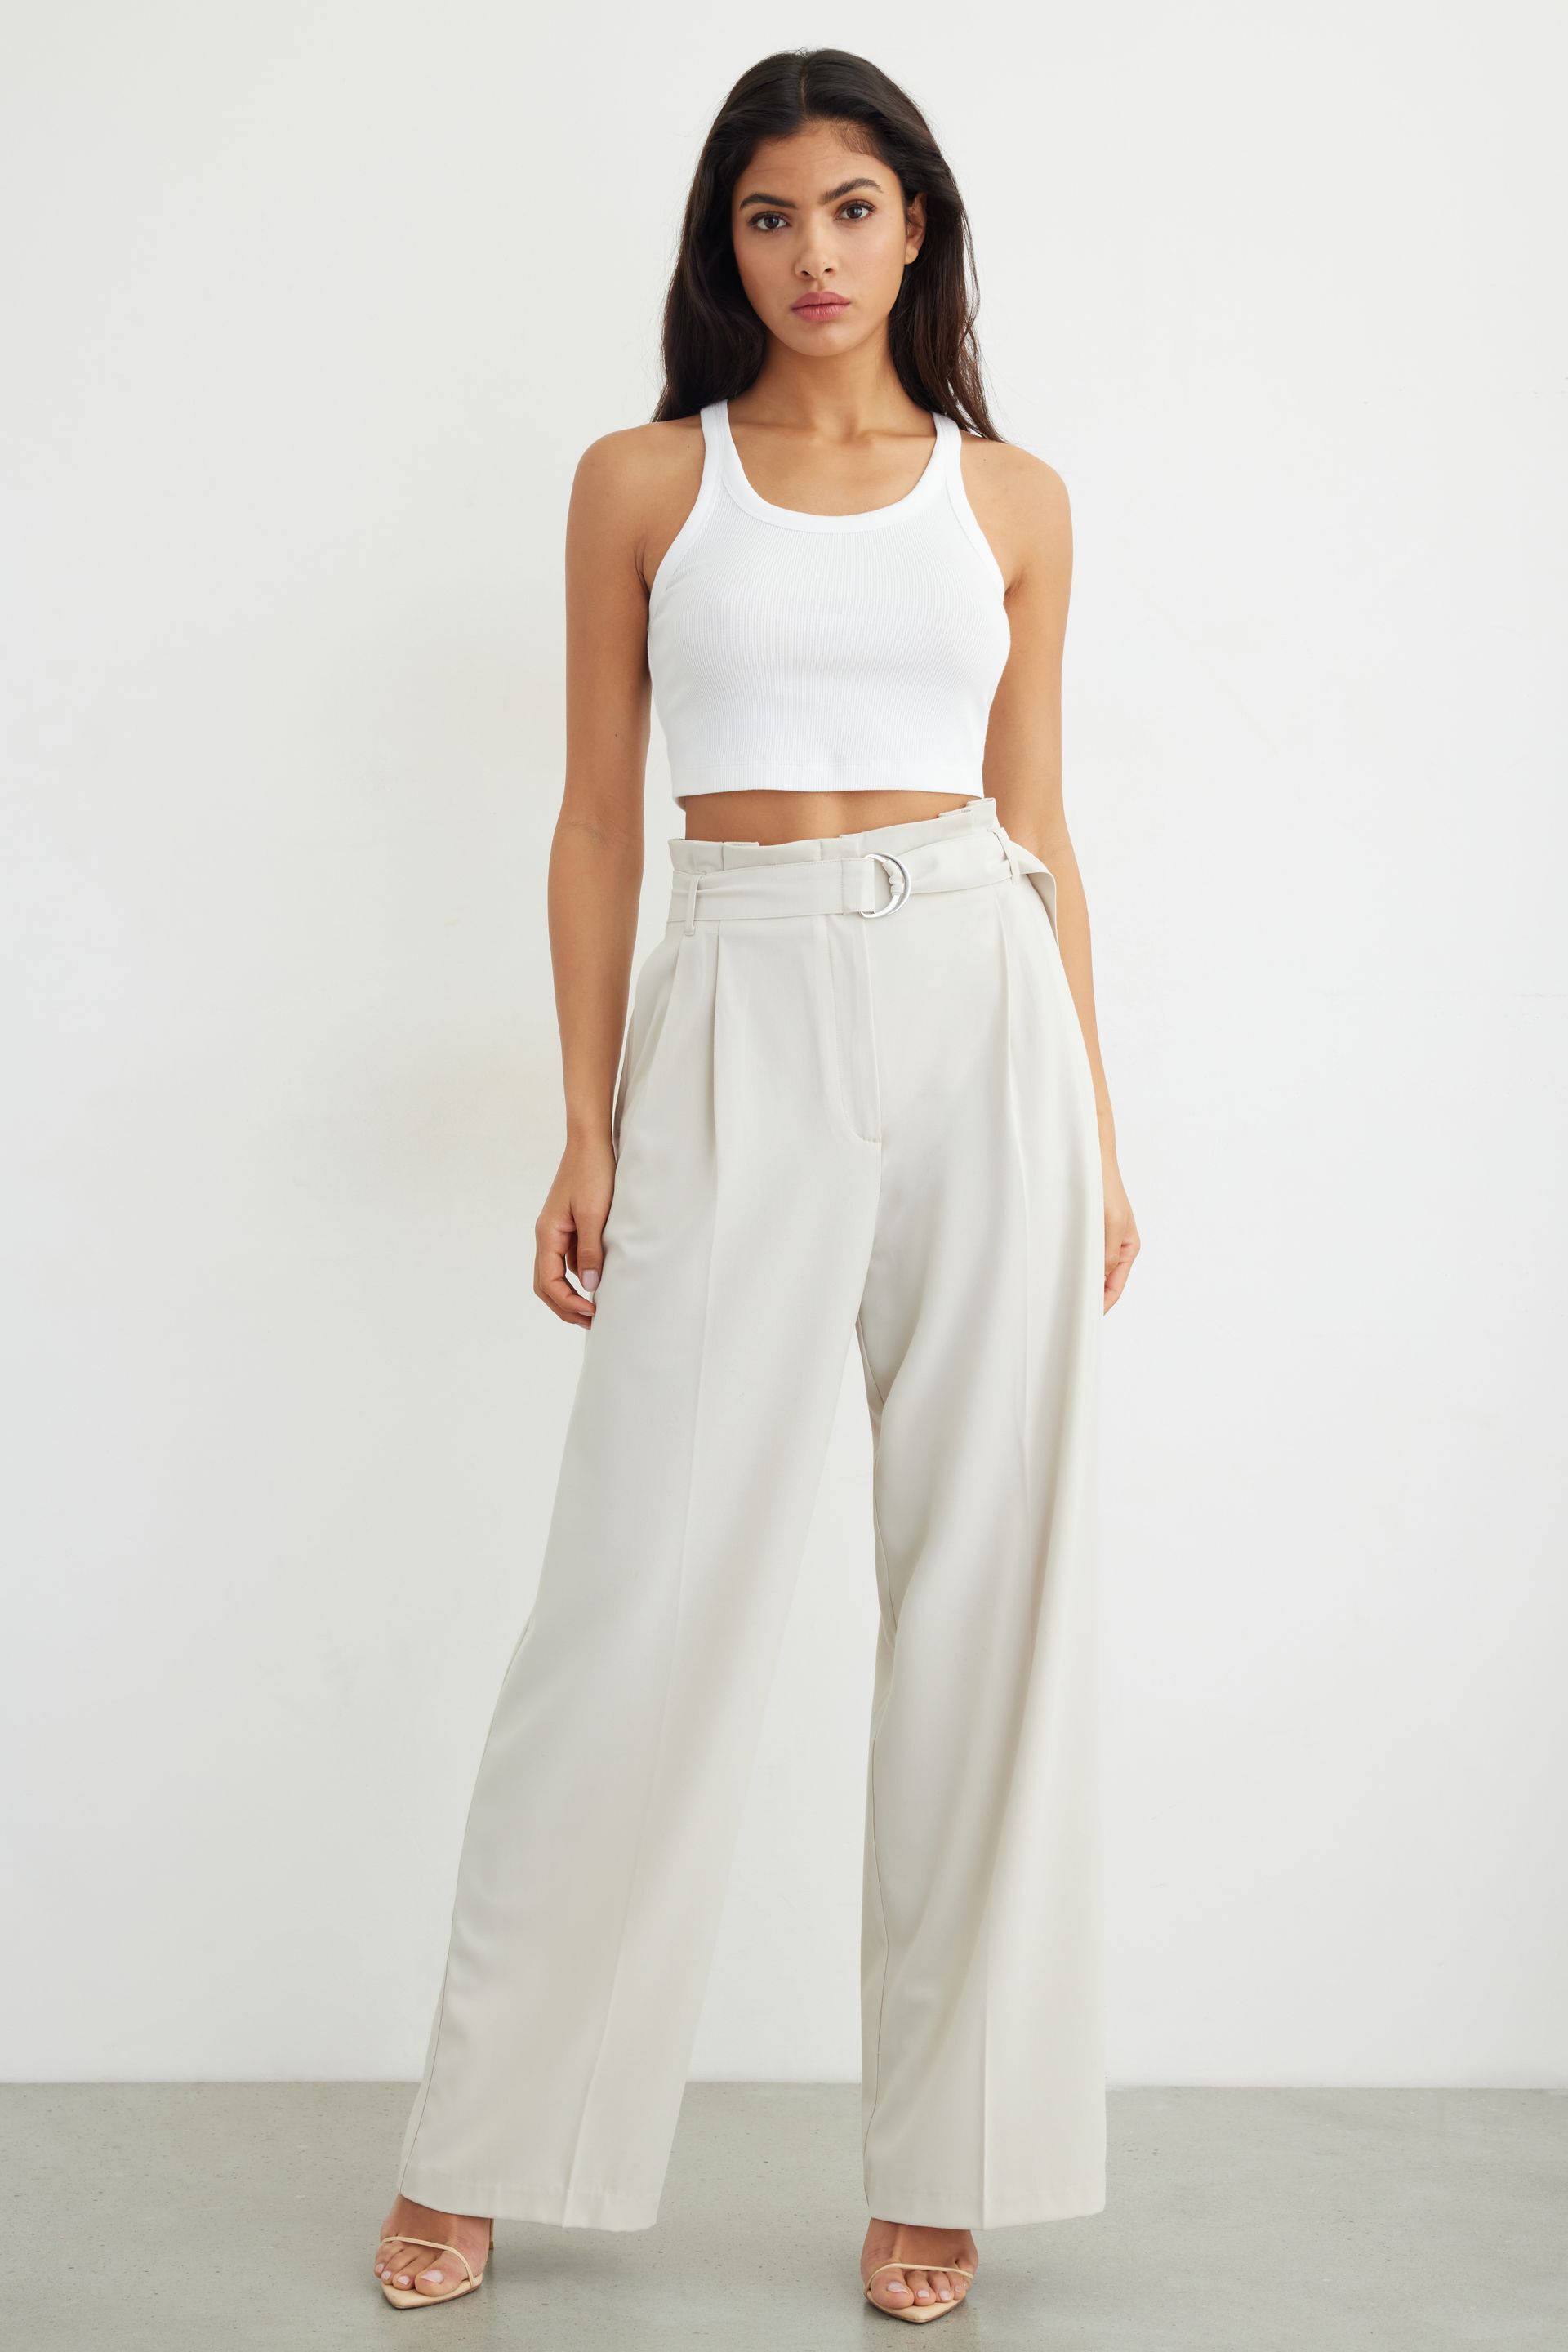 The Faux Leather Paper Bag Pant w/Belt – orianalifestyle.com